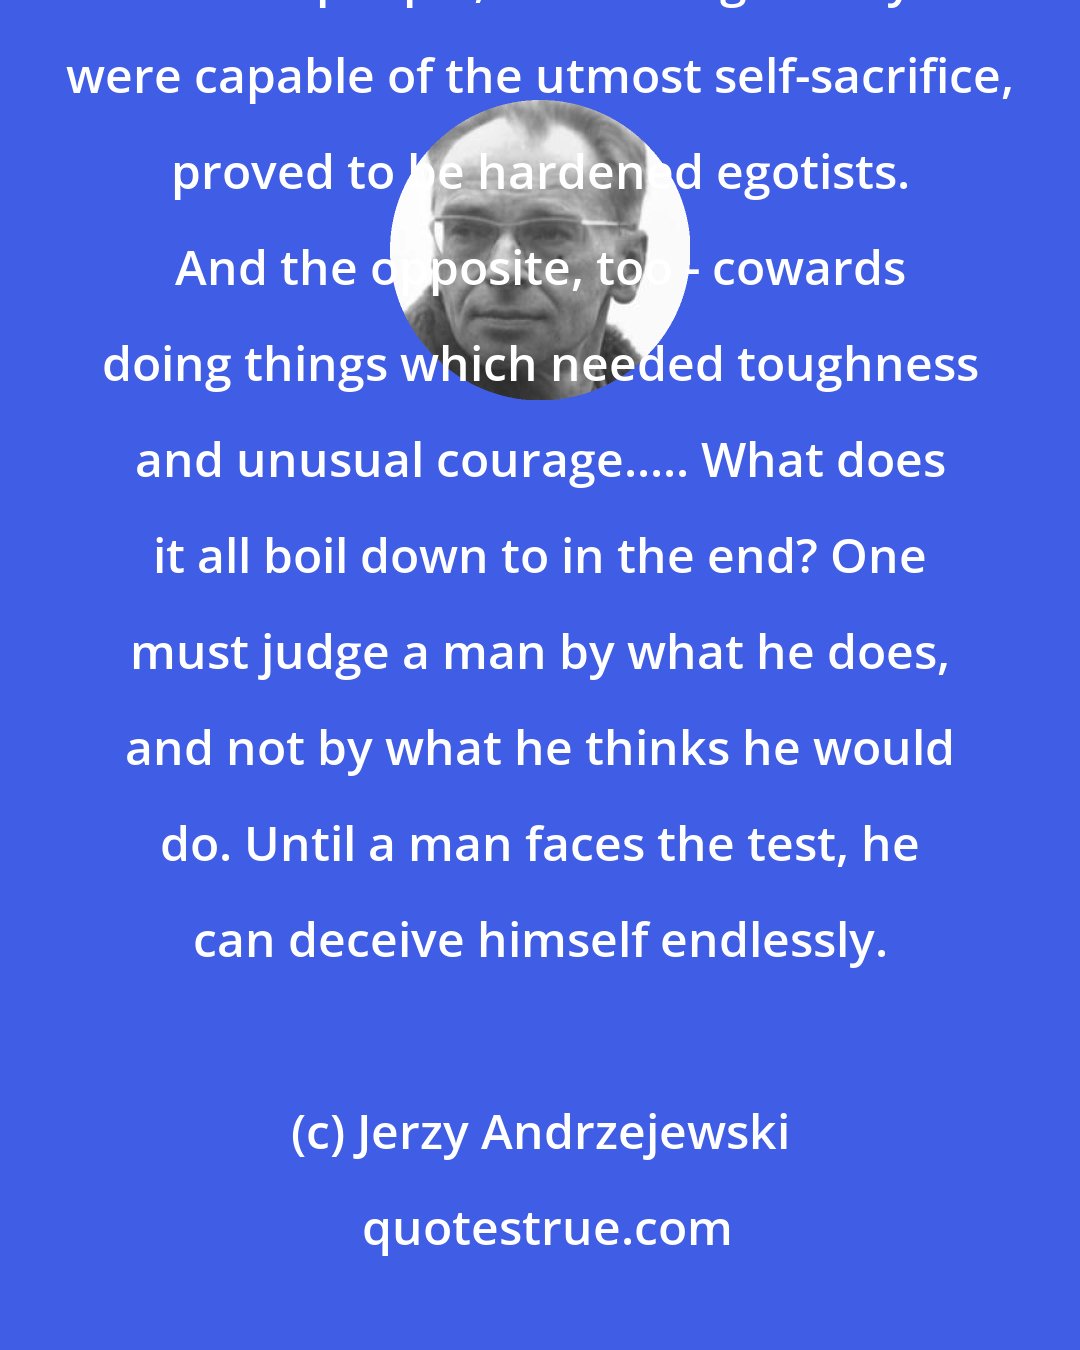 Jerzy Andrzejewski: I've seen men who thought they were brave turn out to be shameful cowards. Other people, who thought they were capable of the utmost self-sacrifice, proved to be hardened egotists. And the opposite, too - cowards doing things which needed toughness and unusual courage..... What does it all boil down to in the end? One must judge a man by what he does, and not by what he thinks he would do. Until a man faces the test, he can deceive himself endlessly.